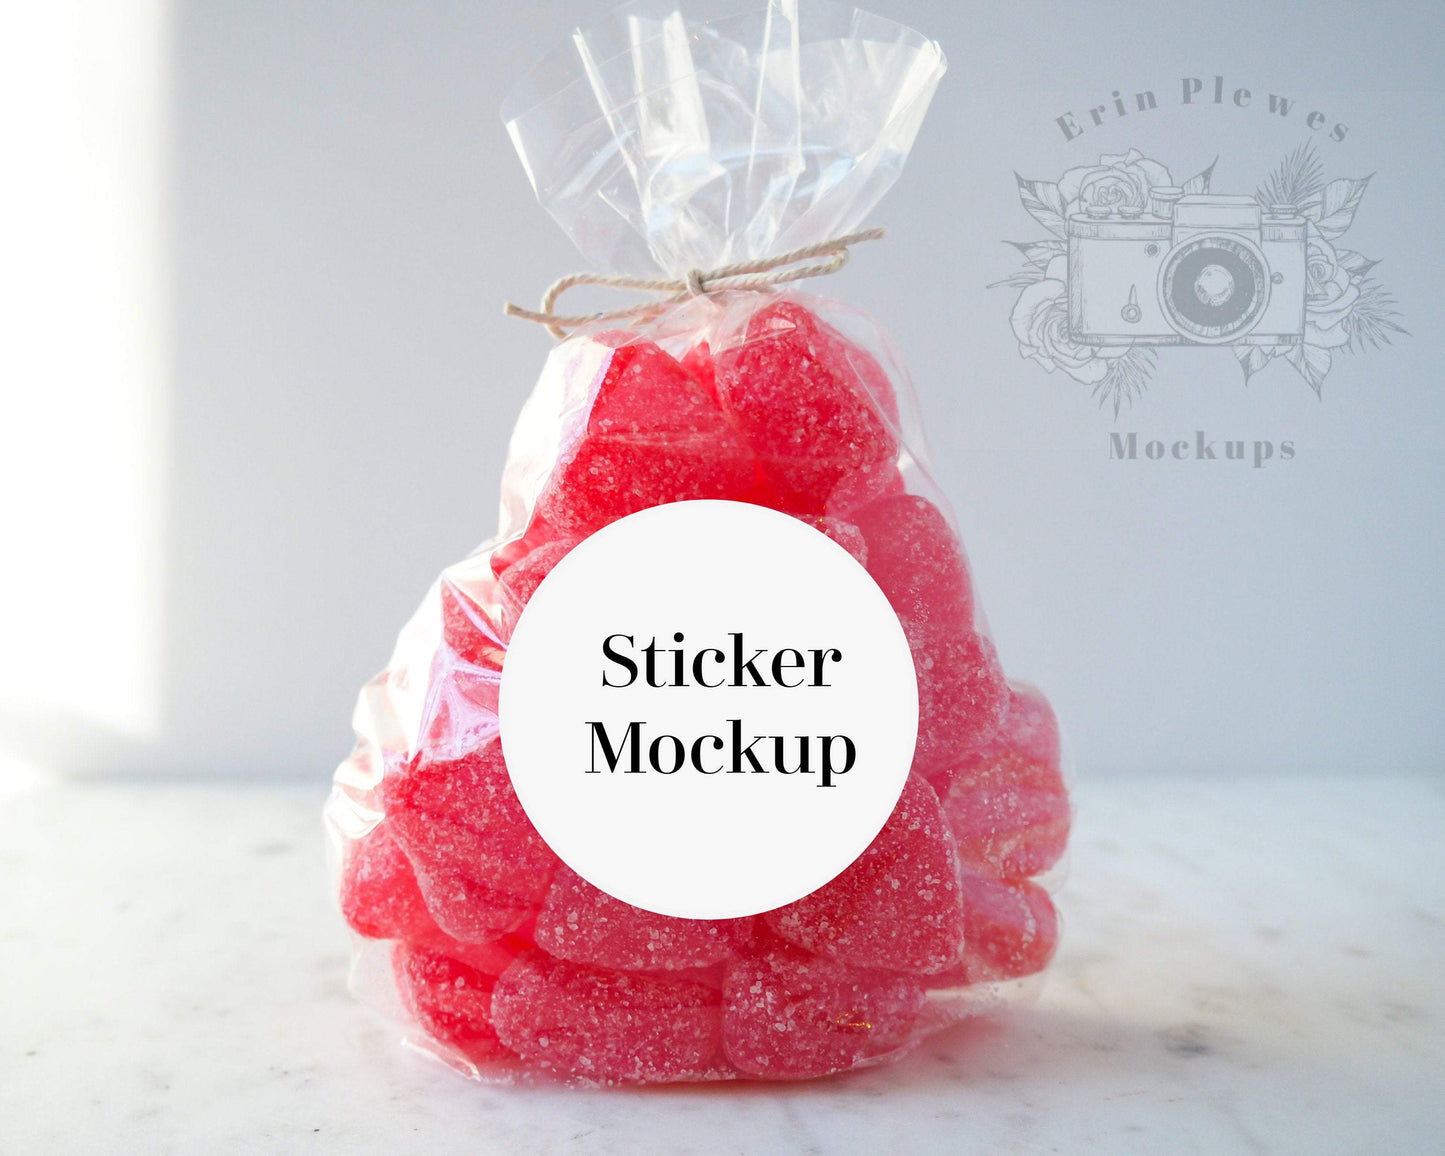 Erin Plewes Mockups Sticker mockup, Round label mock up for Valentine's Day gift bags and stock photography, Jpeg Instant Digital Download Template